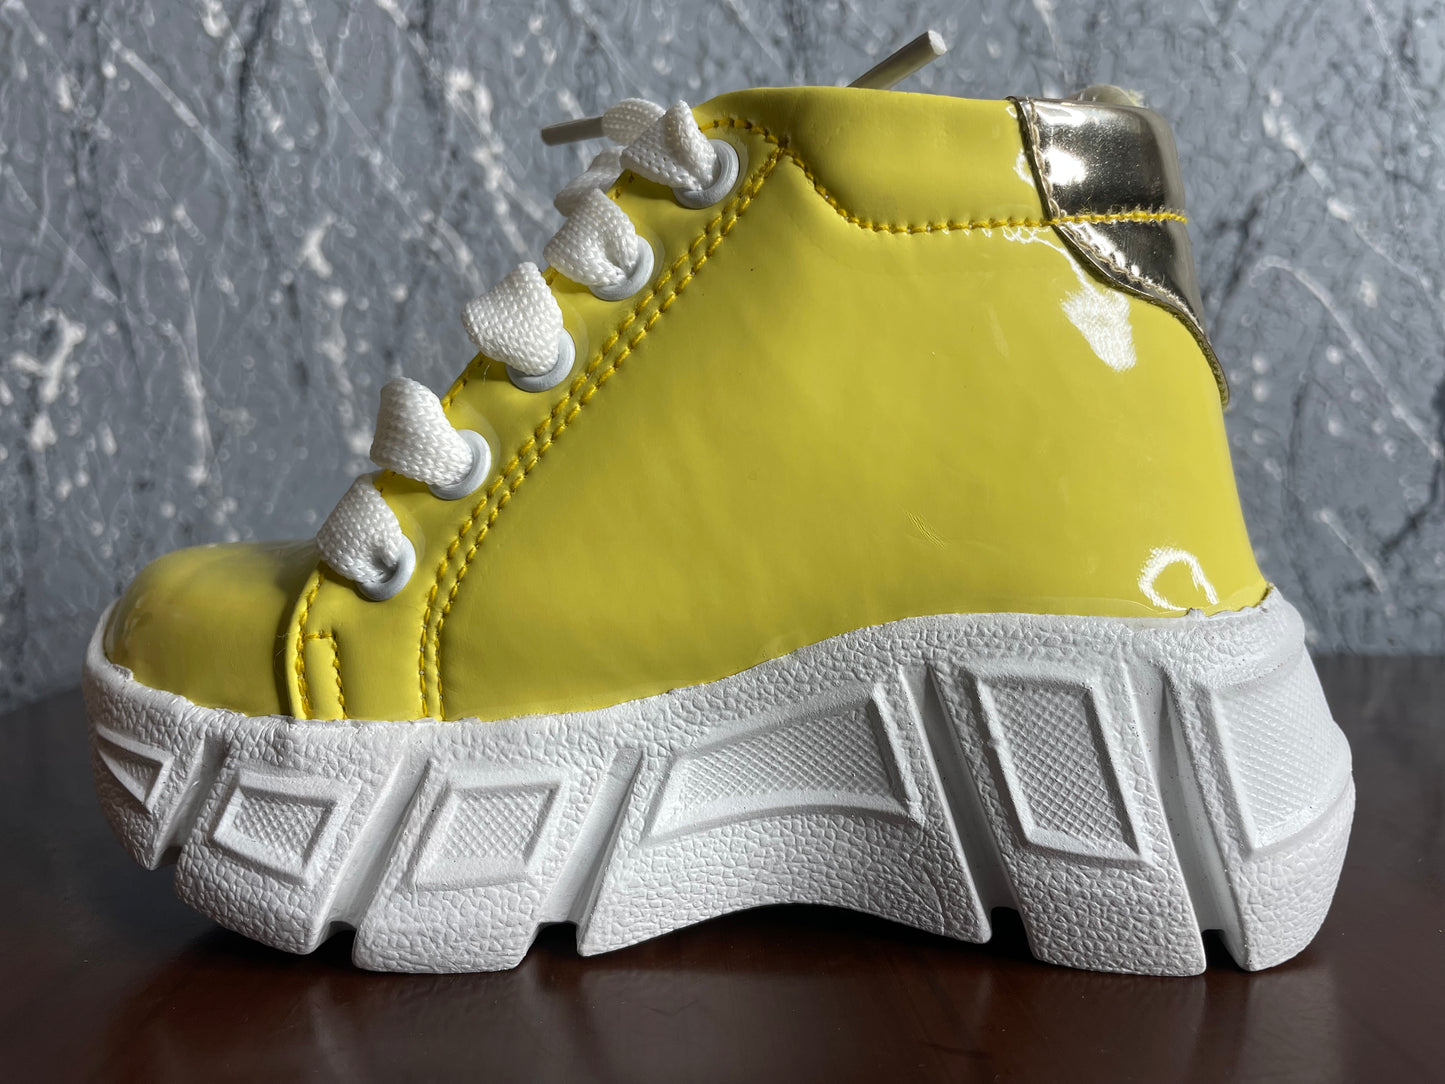 Toddler's Bright Yellow Playtime Shoe